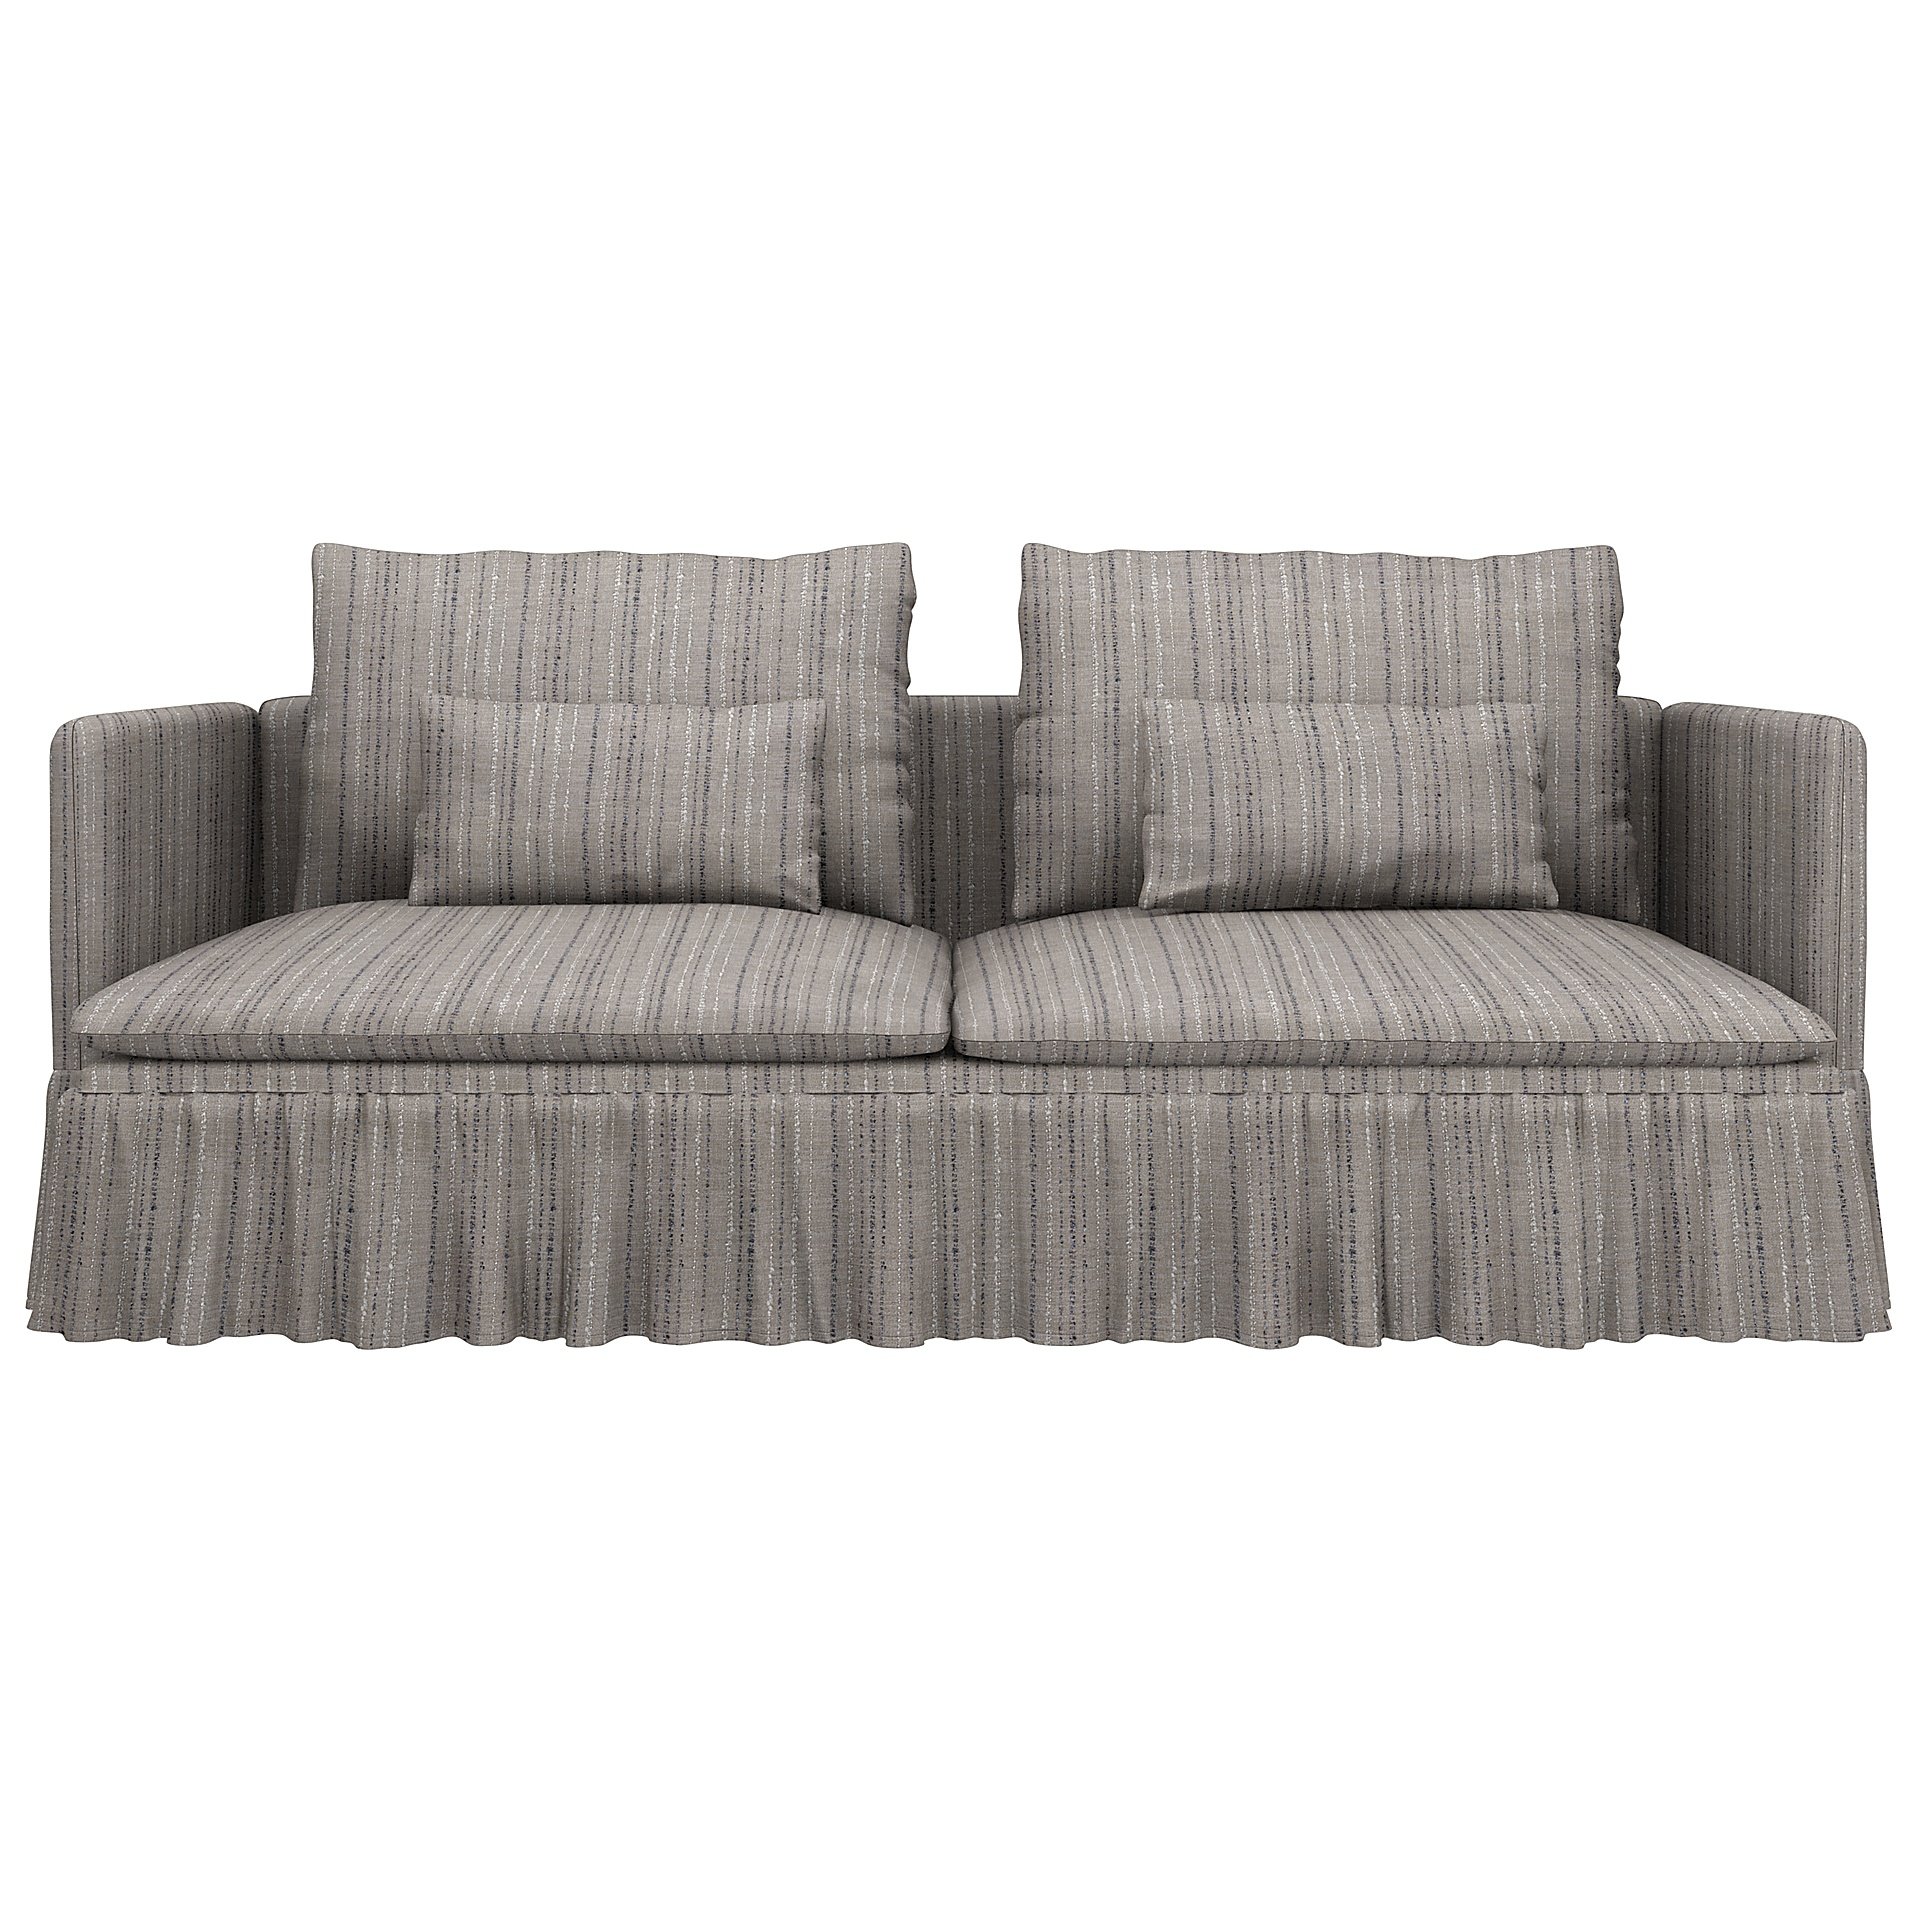 IKEA - Soderhamn 3 seater sofa with armrests cover, , Boucle & Texture - Bemz